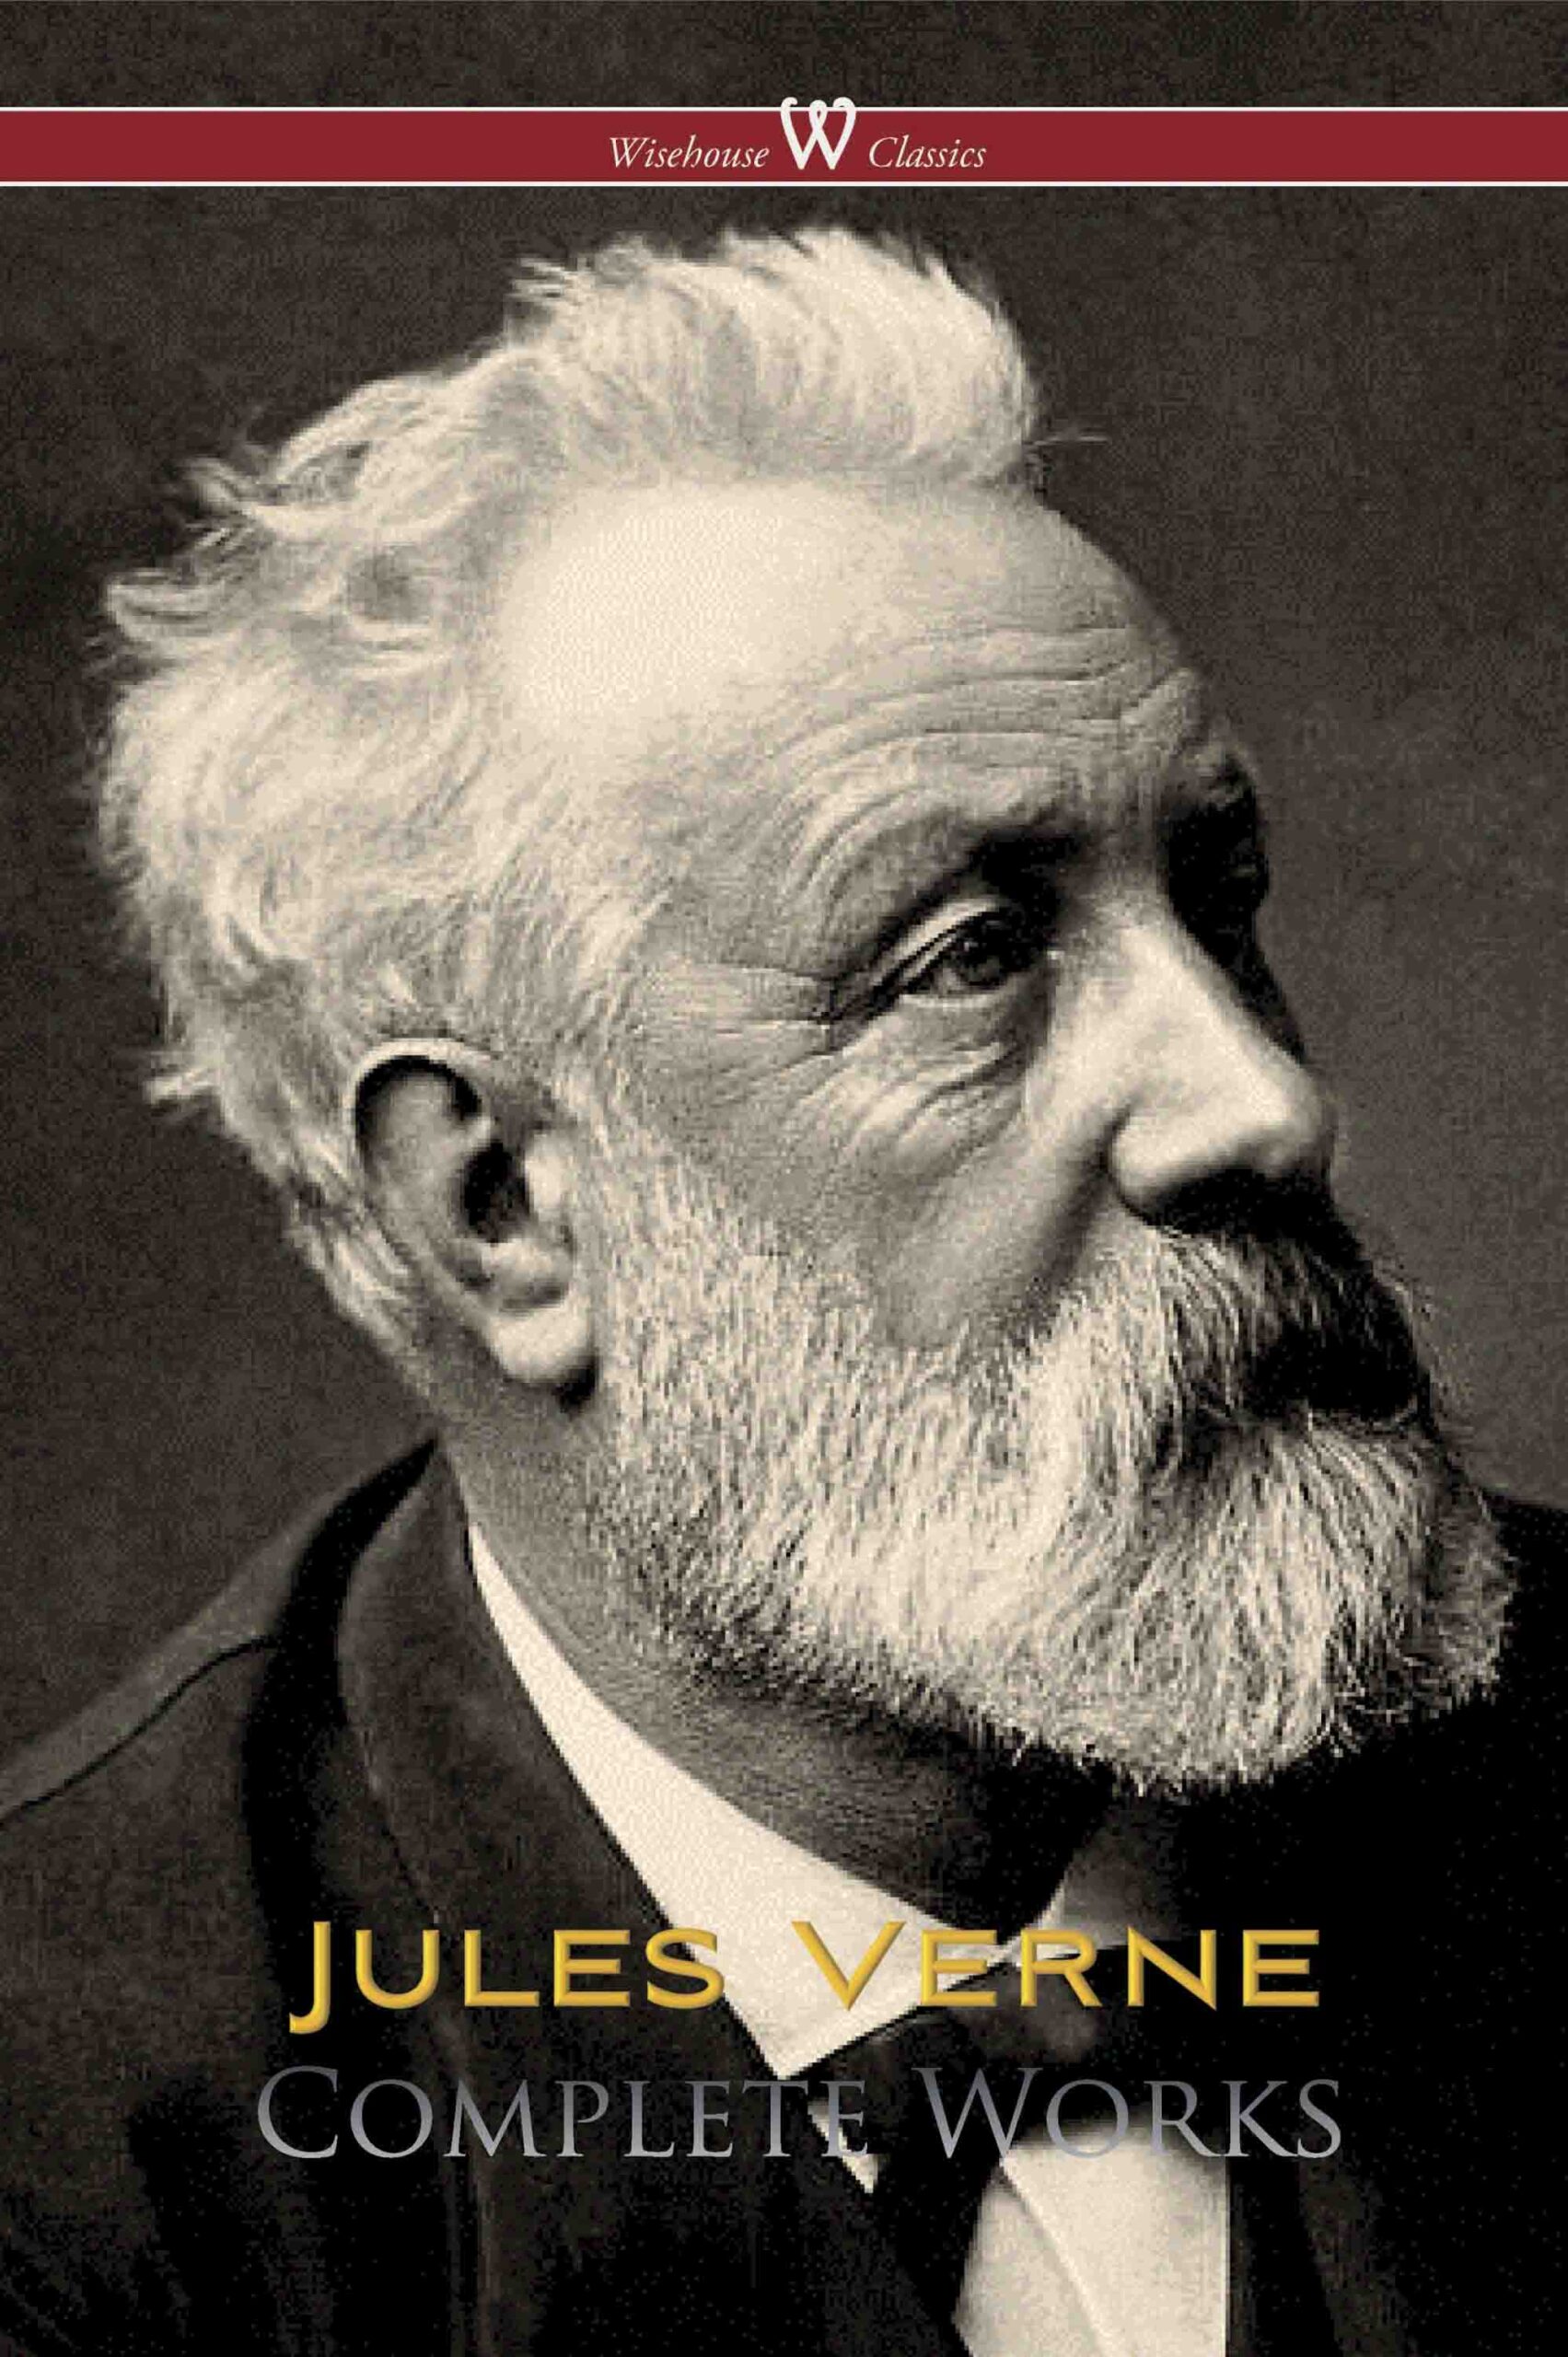 Jules Verne: Complete Works (Wisehouse Classics Edition)